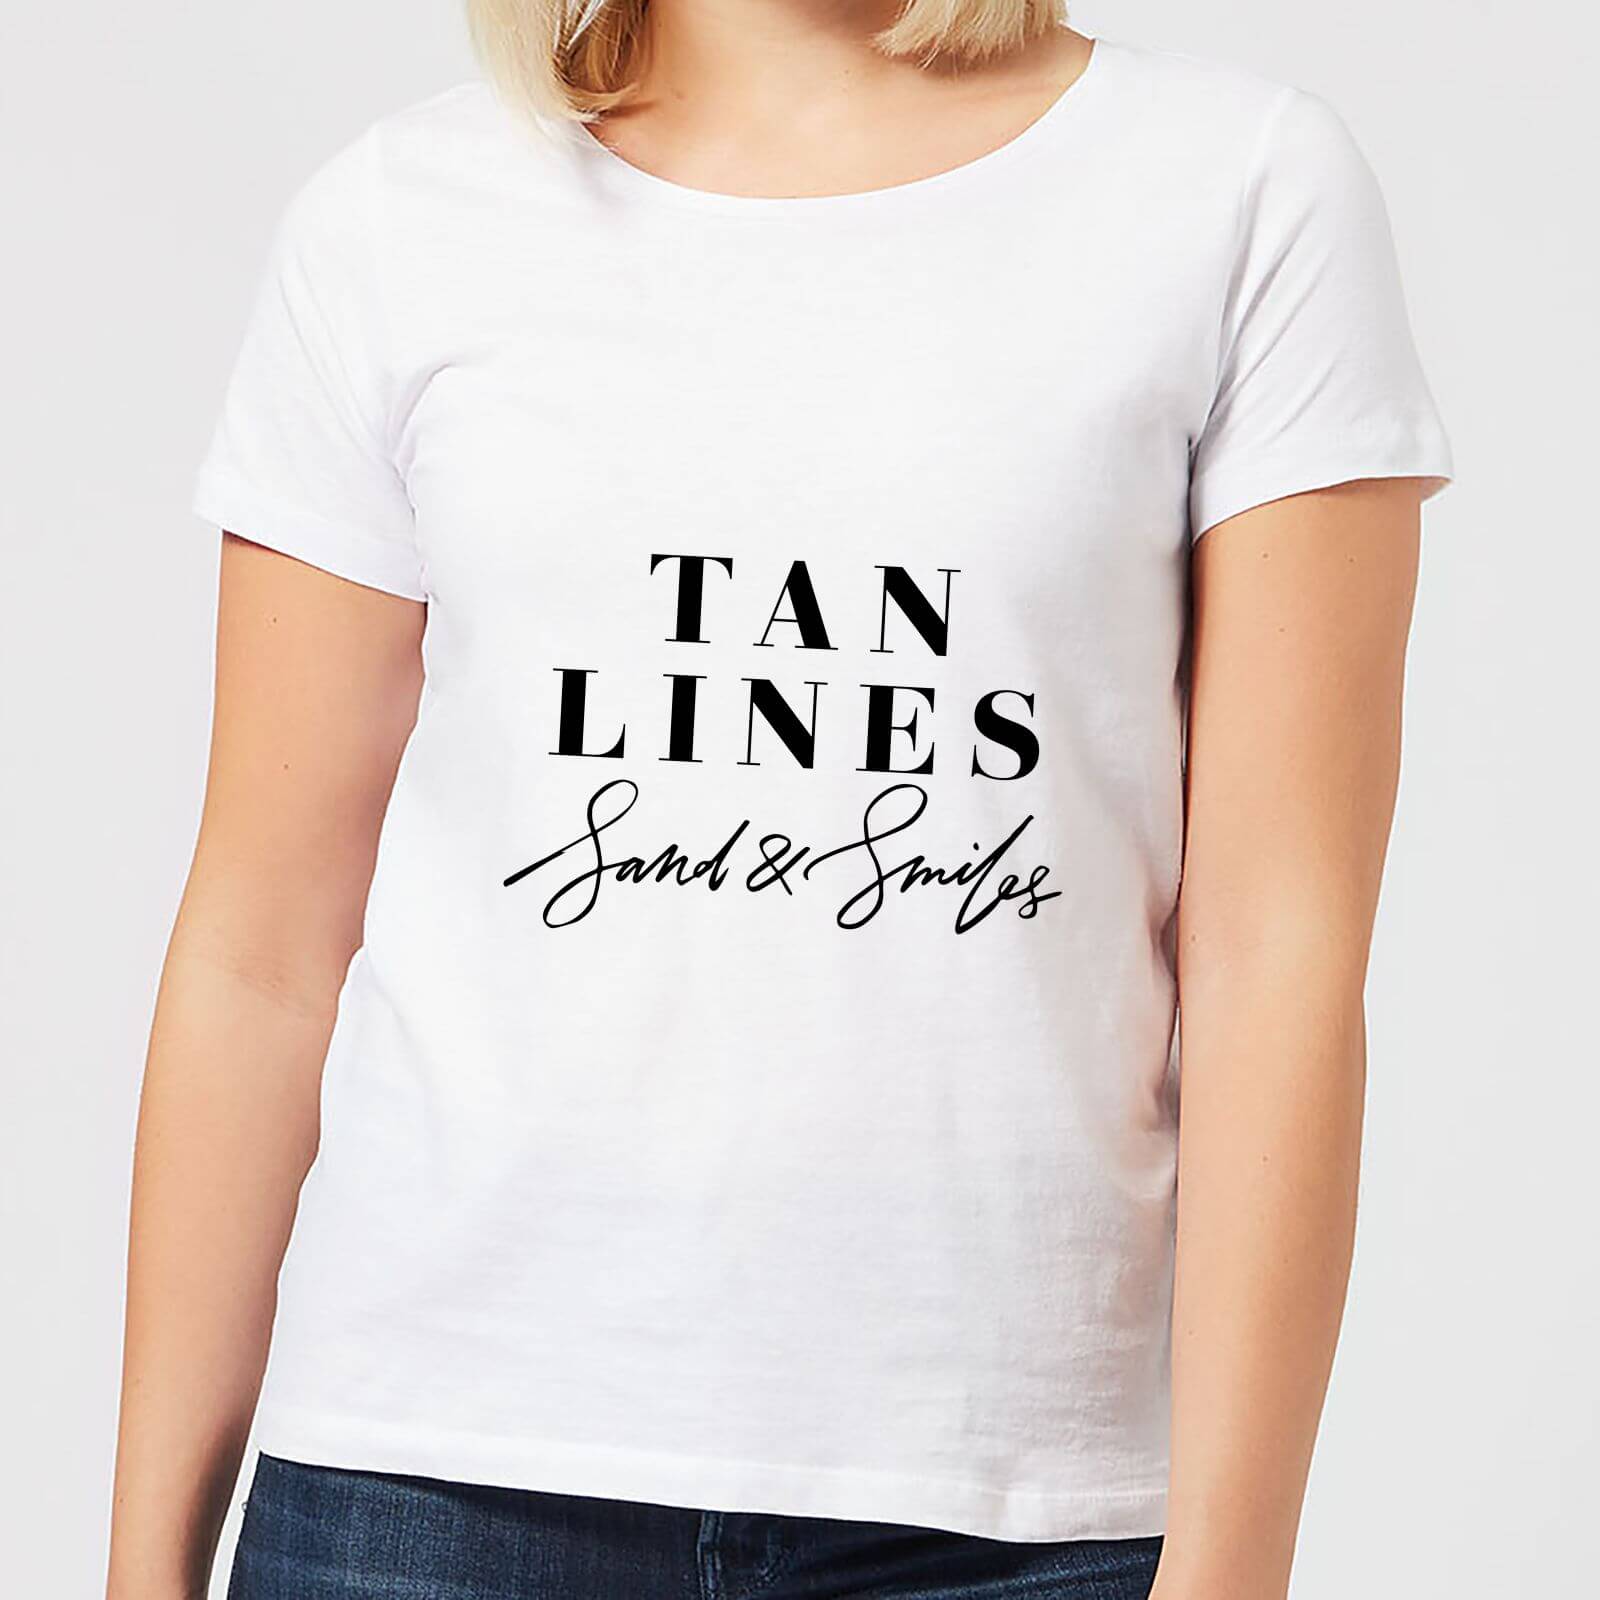 Tan Lines, Sand and Smiles Women's T-Shirt - White - S - White